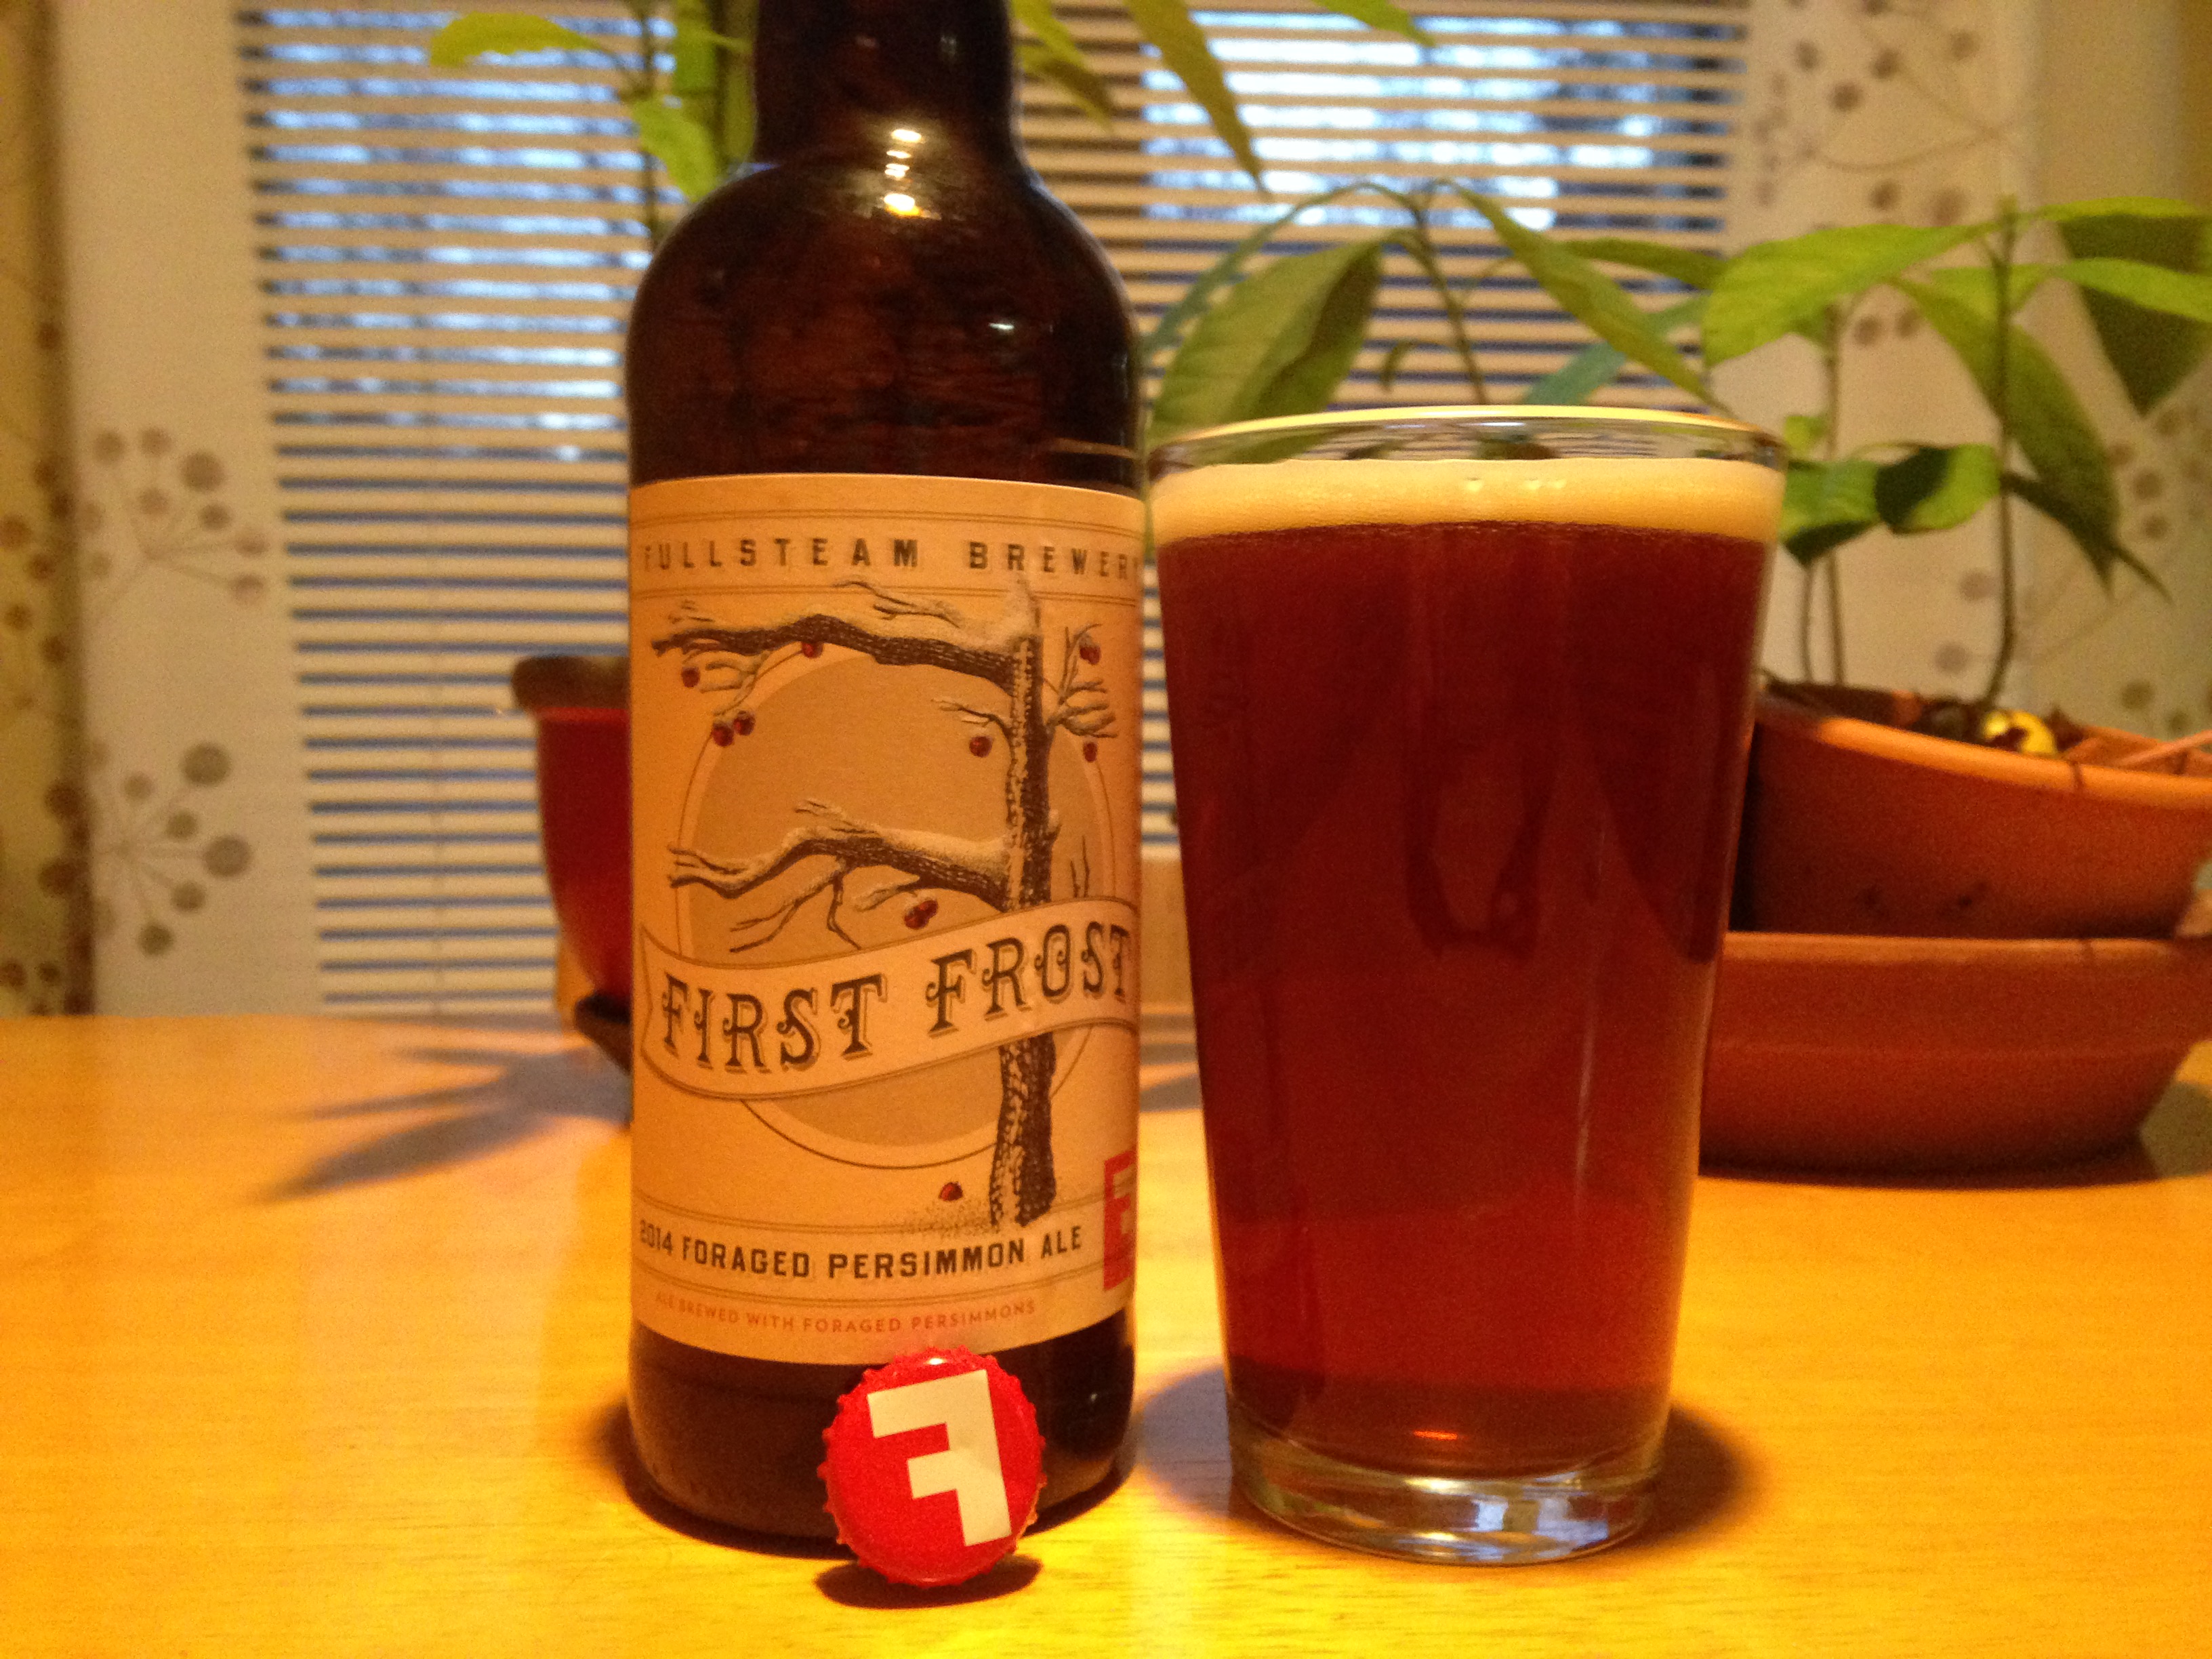 Fullsteam First Frost Persimmon Ale